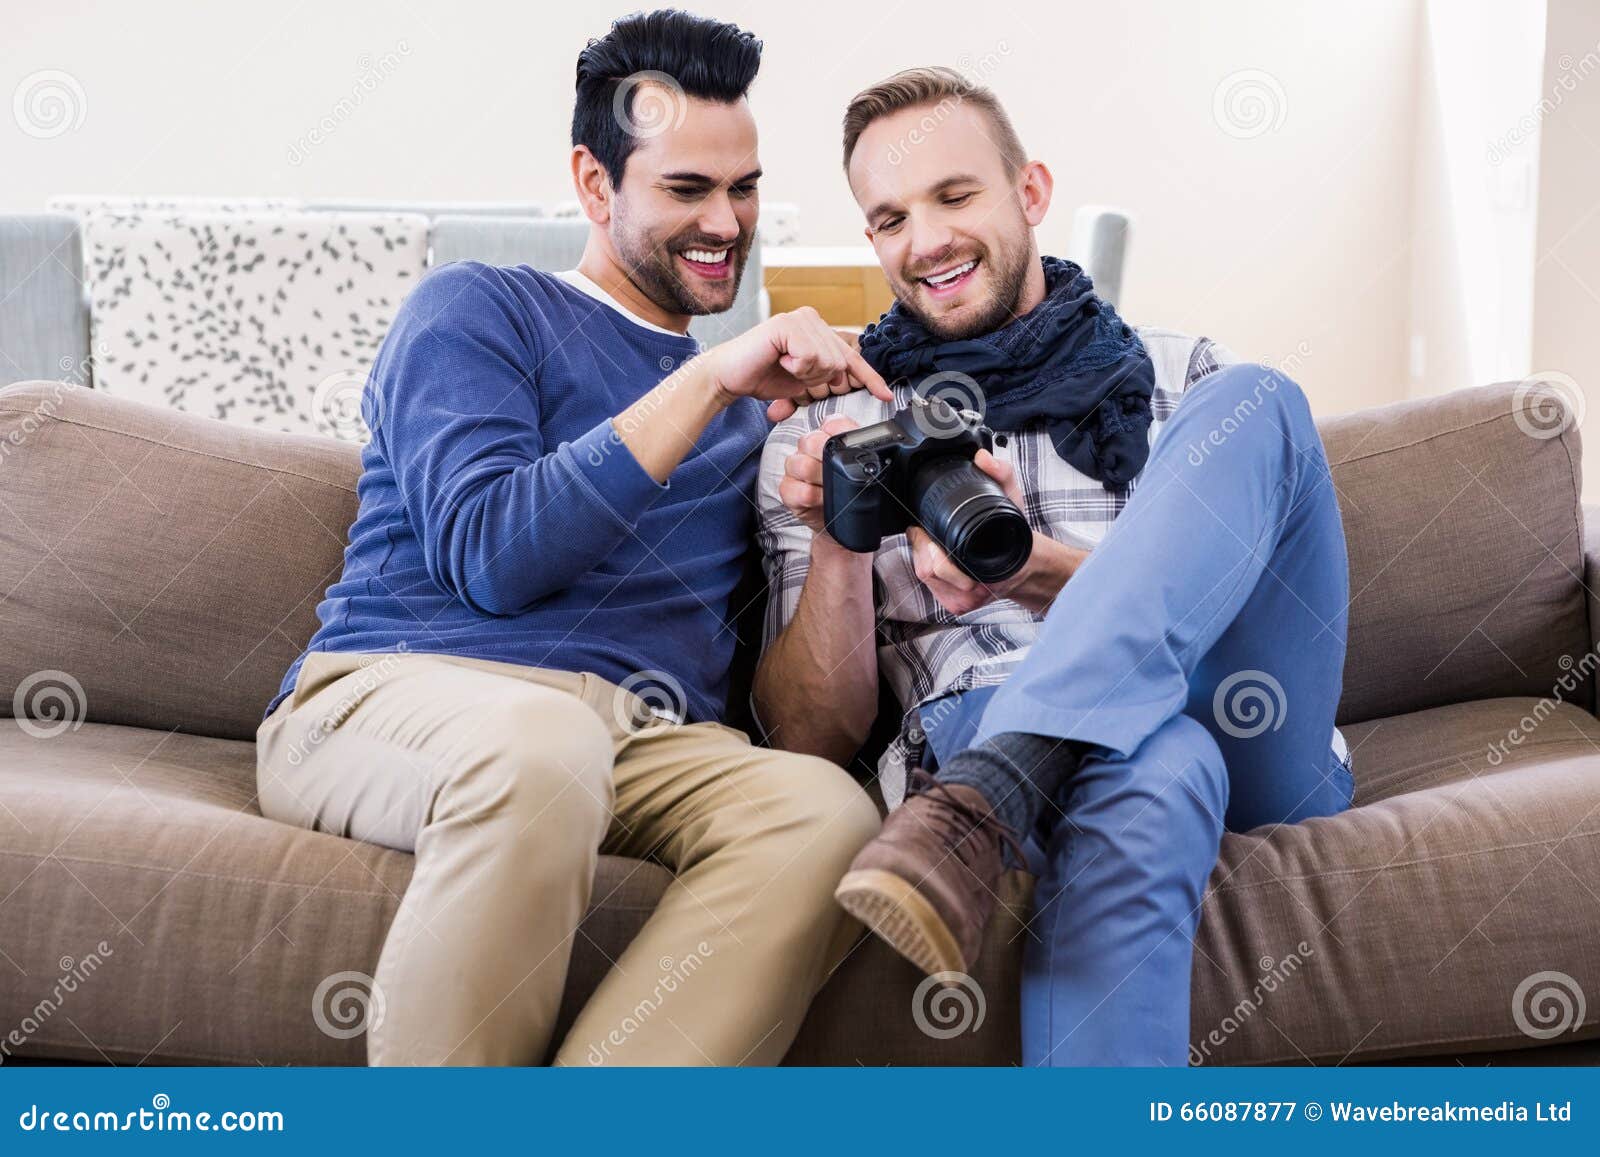 Gay Couple Watching Pictures On The Couch Stock Image Image Of People Homosexual 66087877